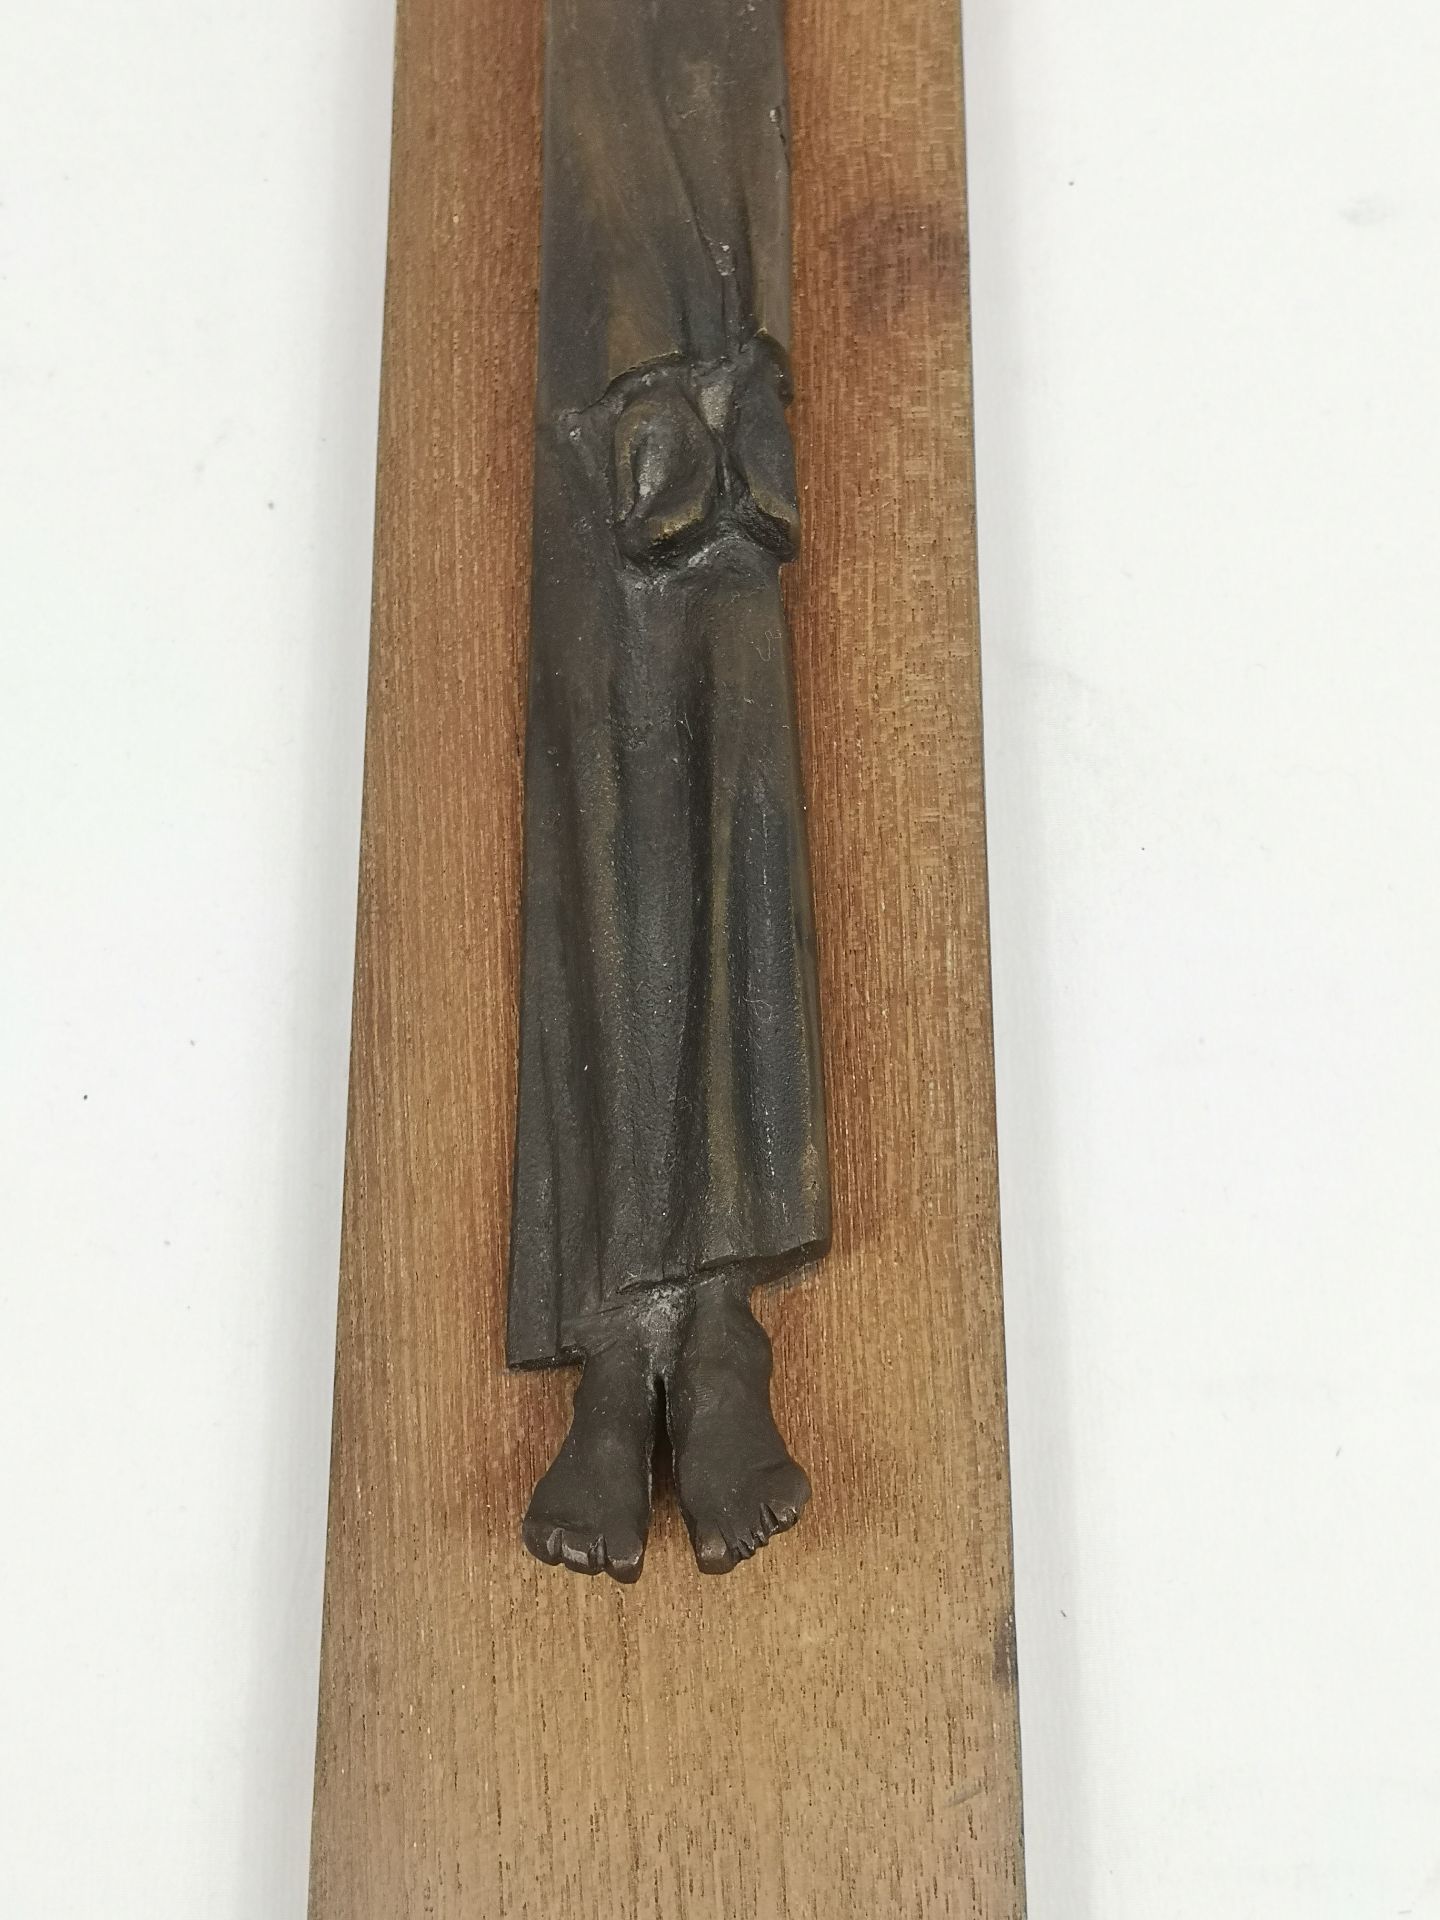 Bronze figure of Christ mounted on wood, stamped S. J. Lowcock - Image 4 of 4